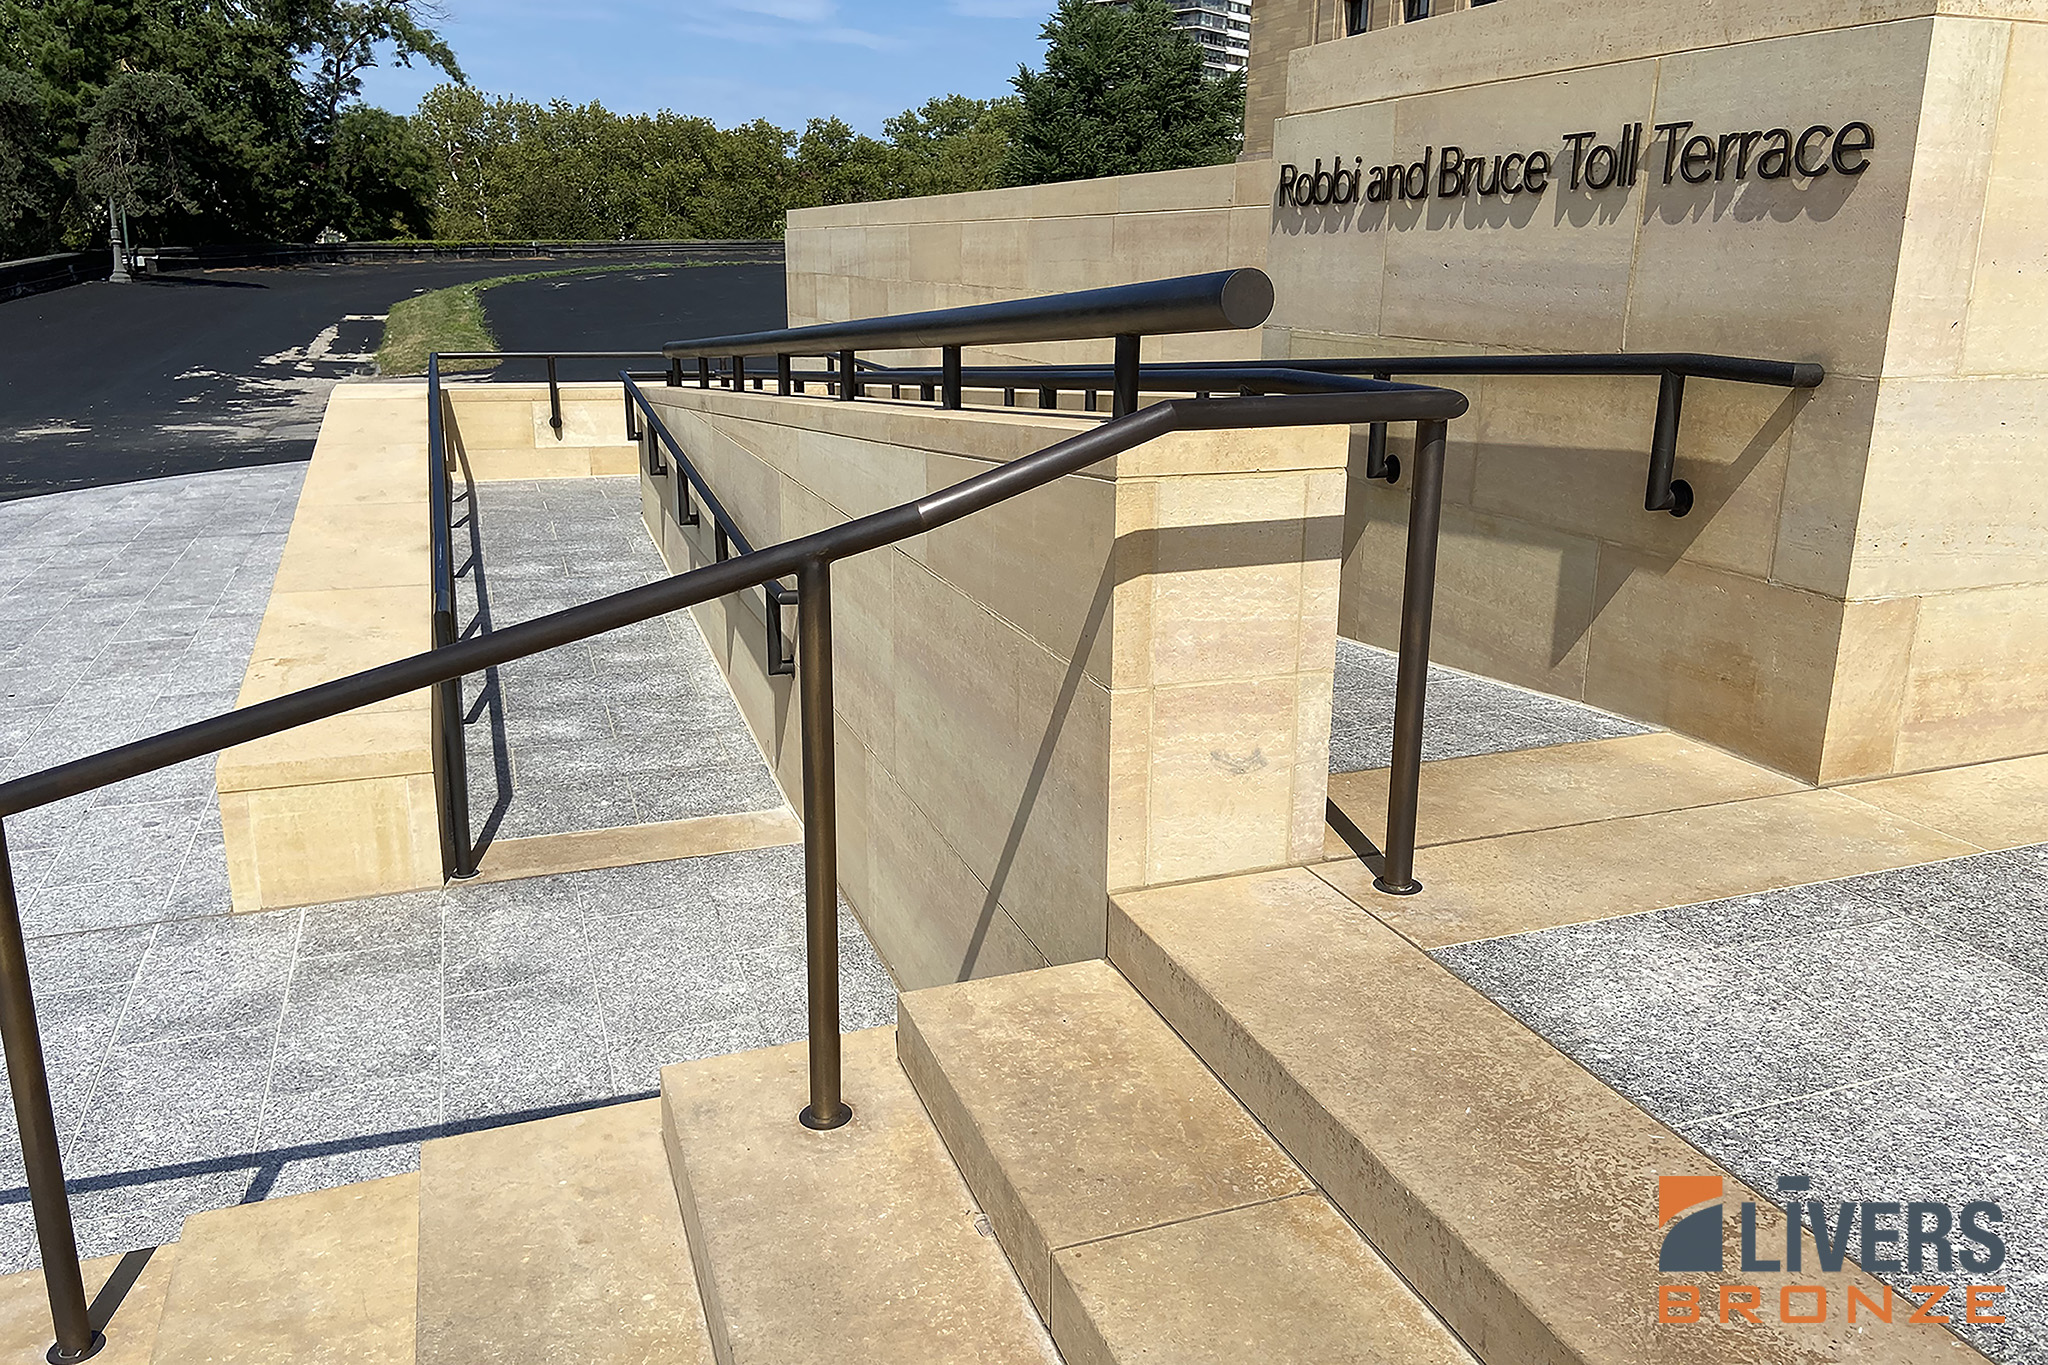 Livers Bronze Custom Bronze Railings were installed at the Lobby Stairs and Exterior Stairs at the Philadelphia Museum Of Art and were made in the USA.